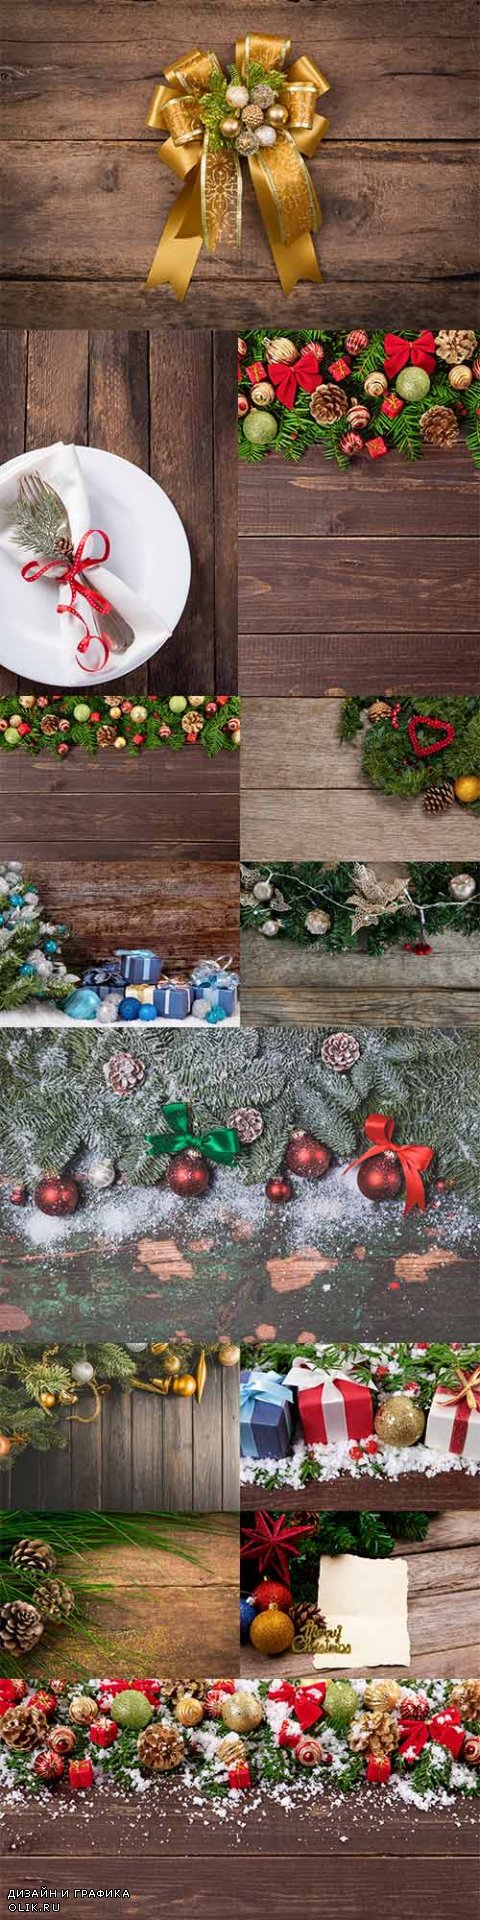 Wooden backgrounds with Christmas decorations 2